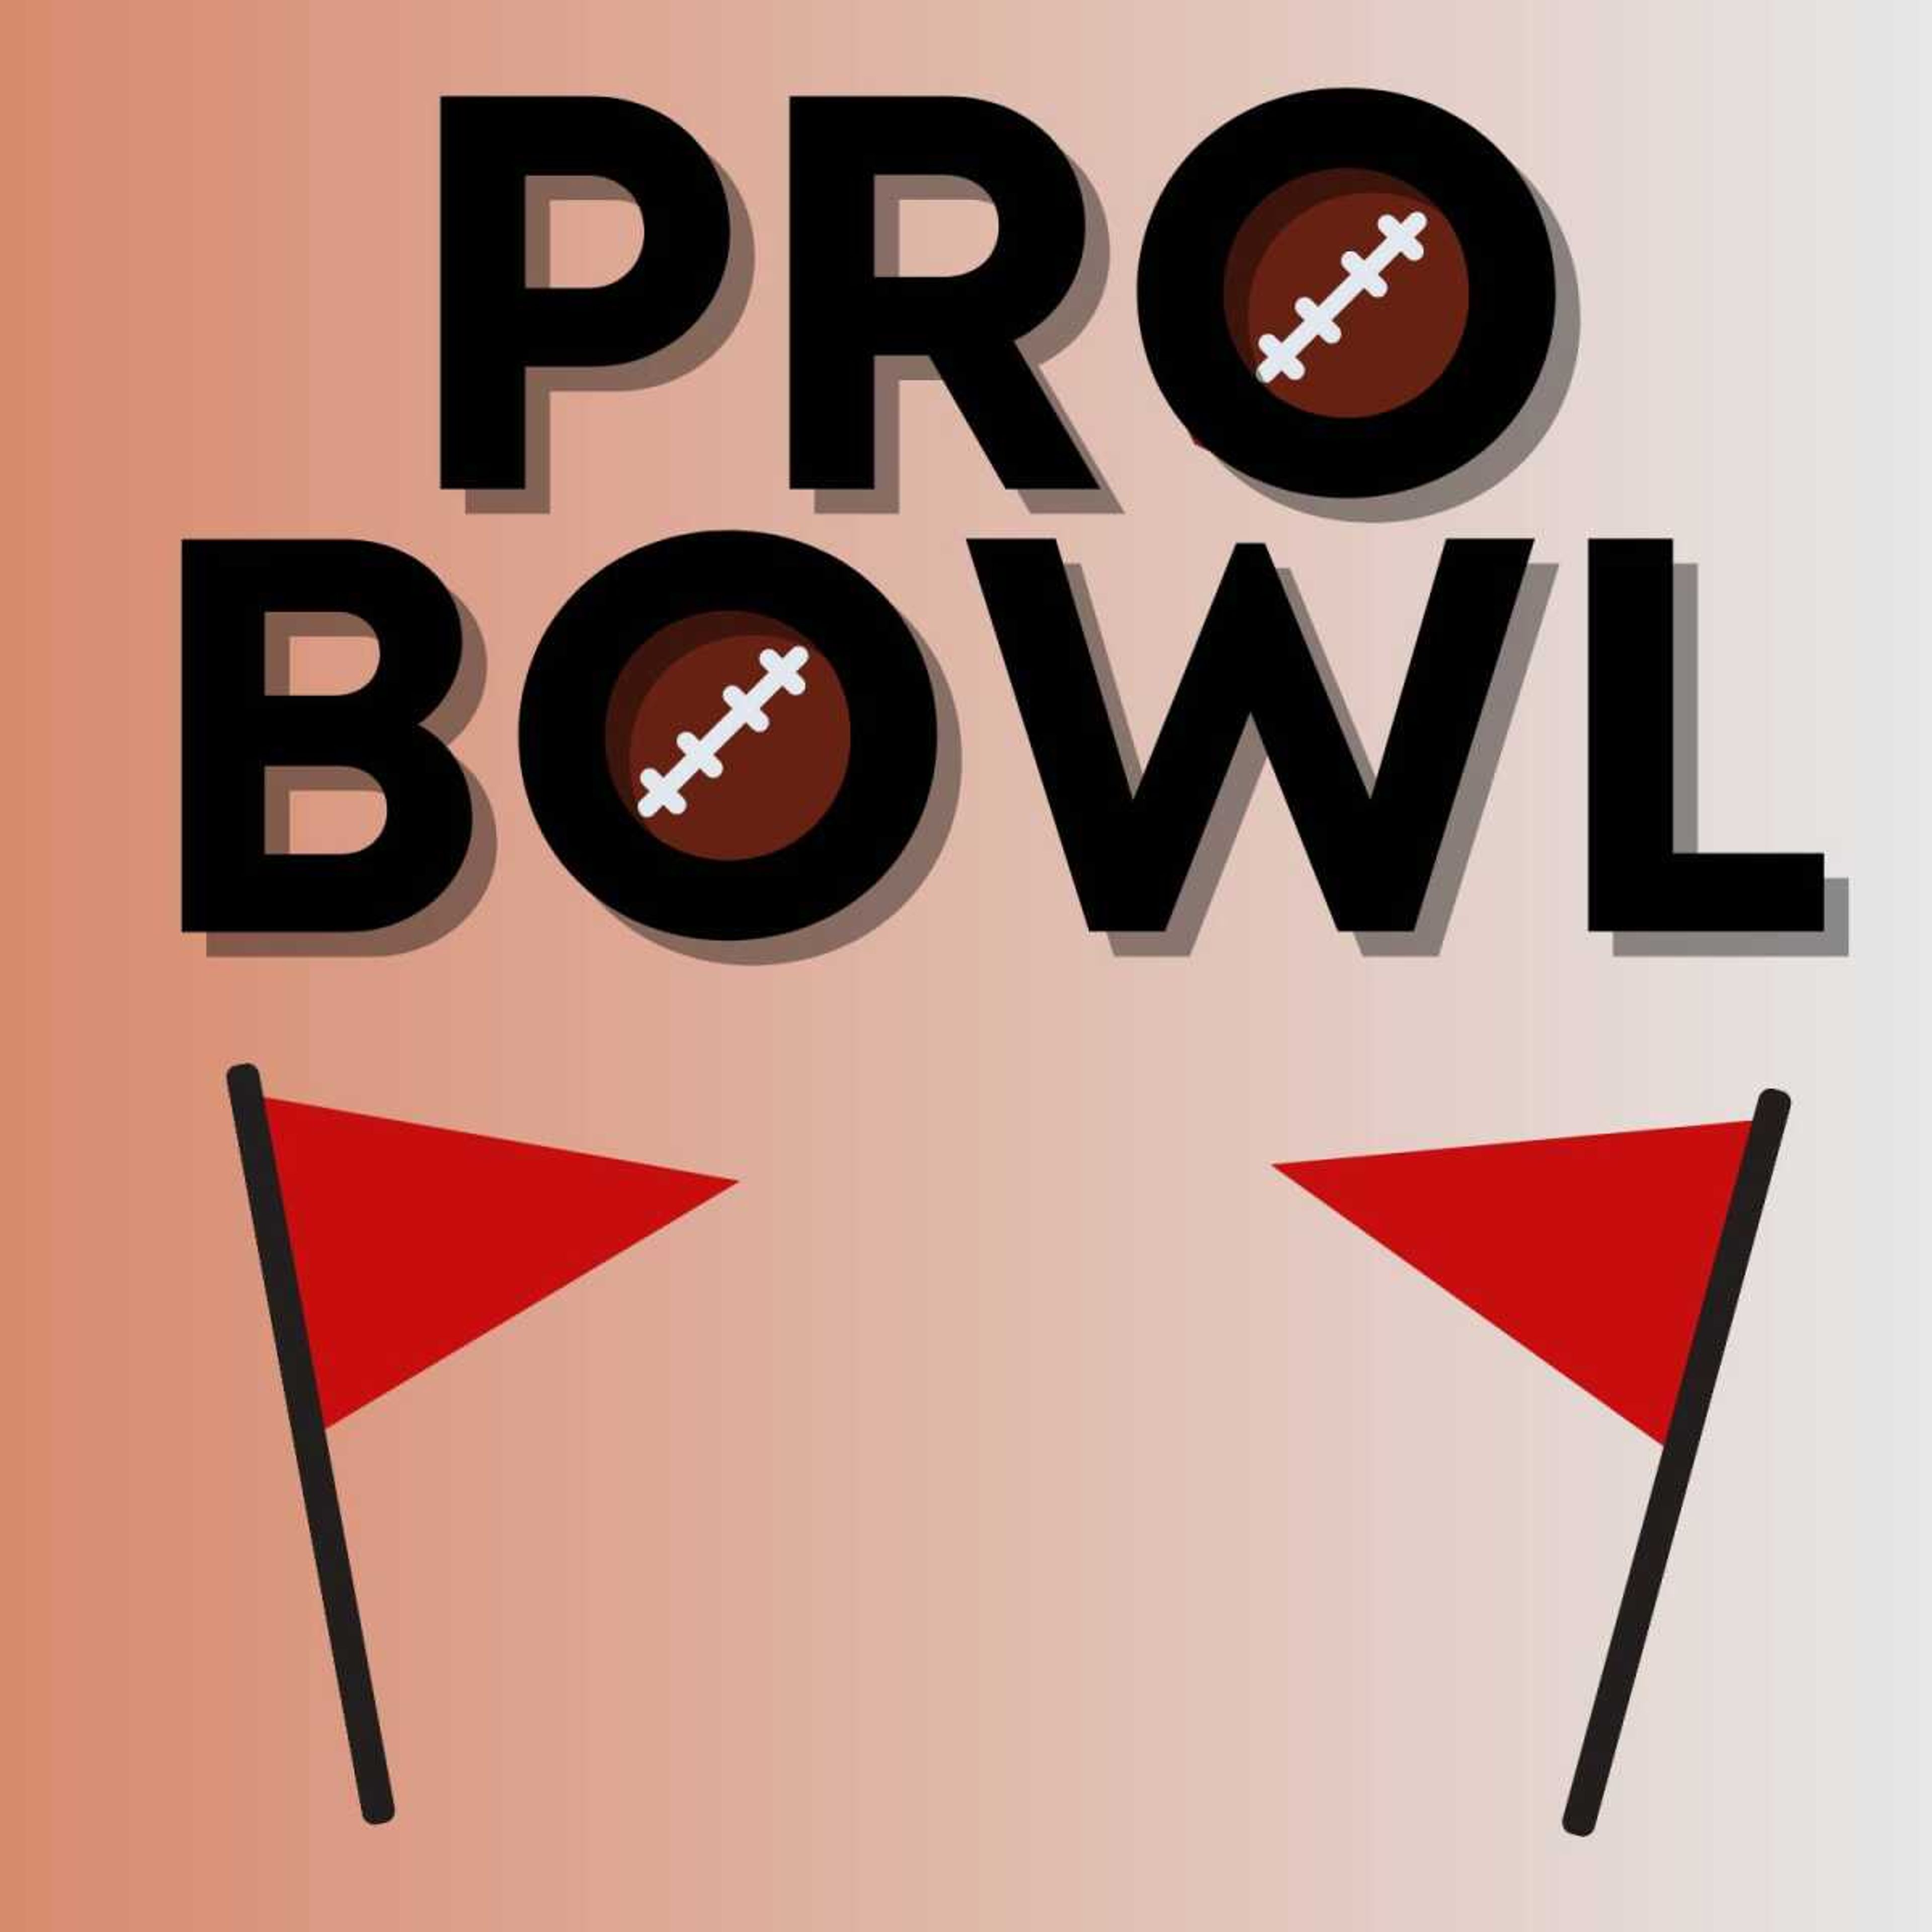 NFL introduces new formatting to Pro Bowl